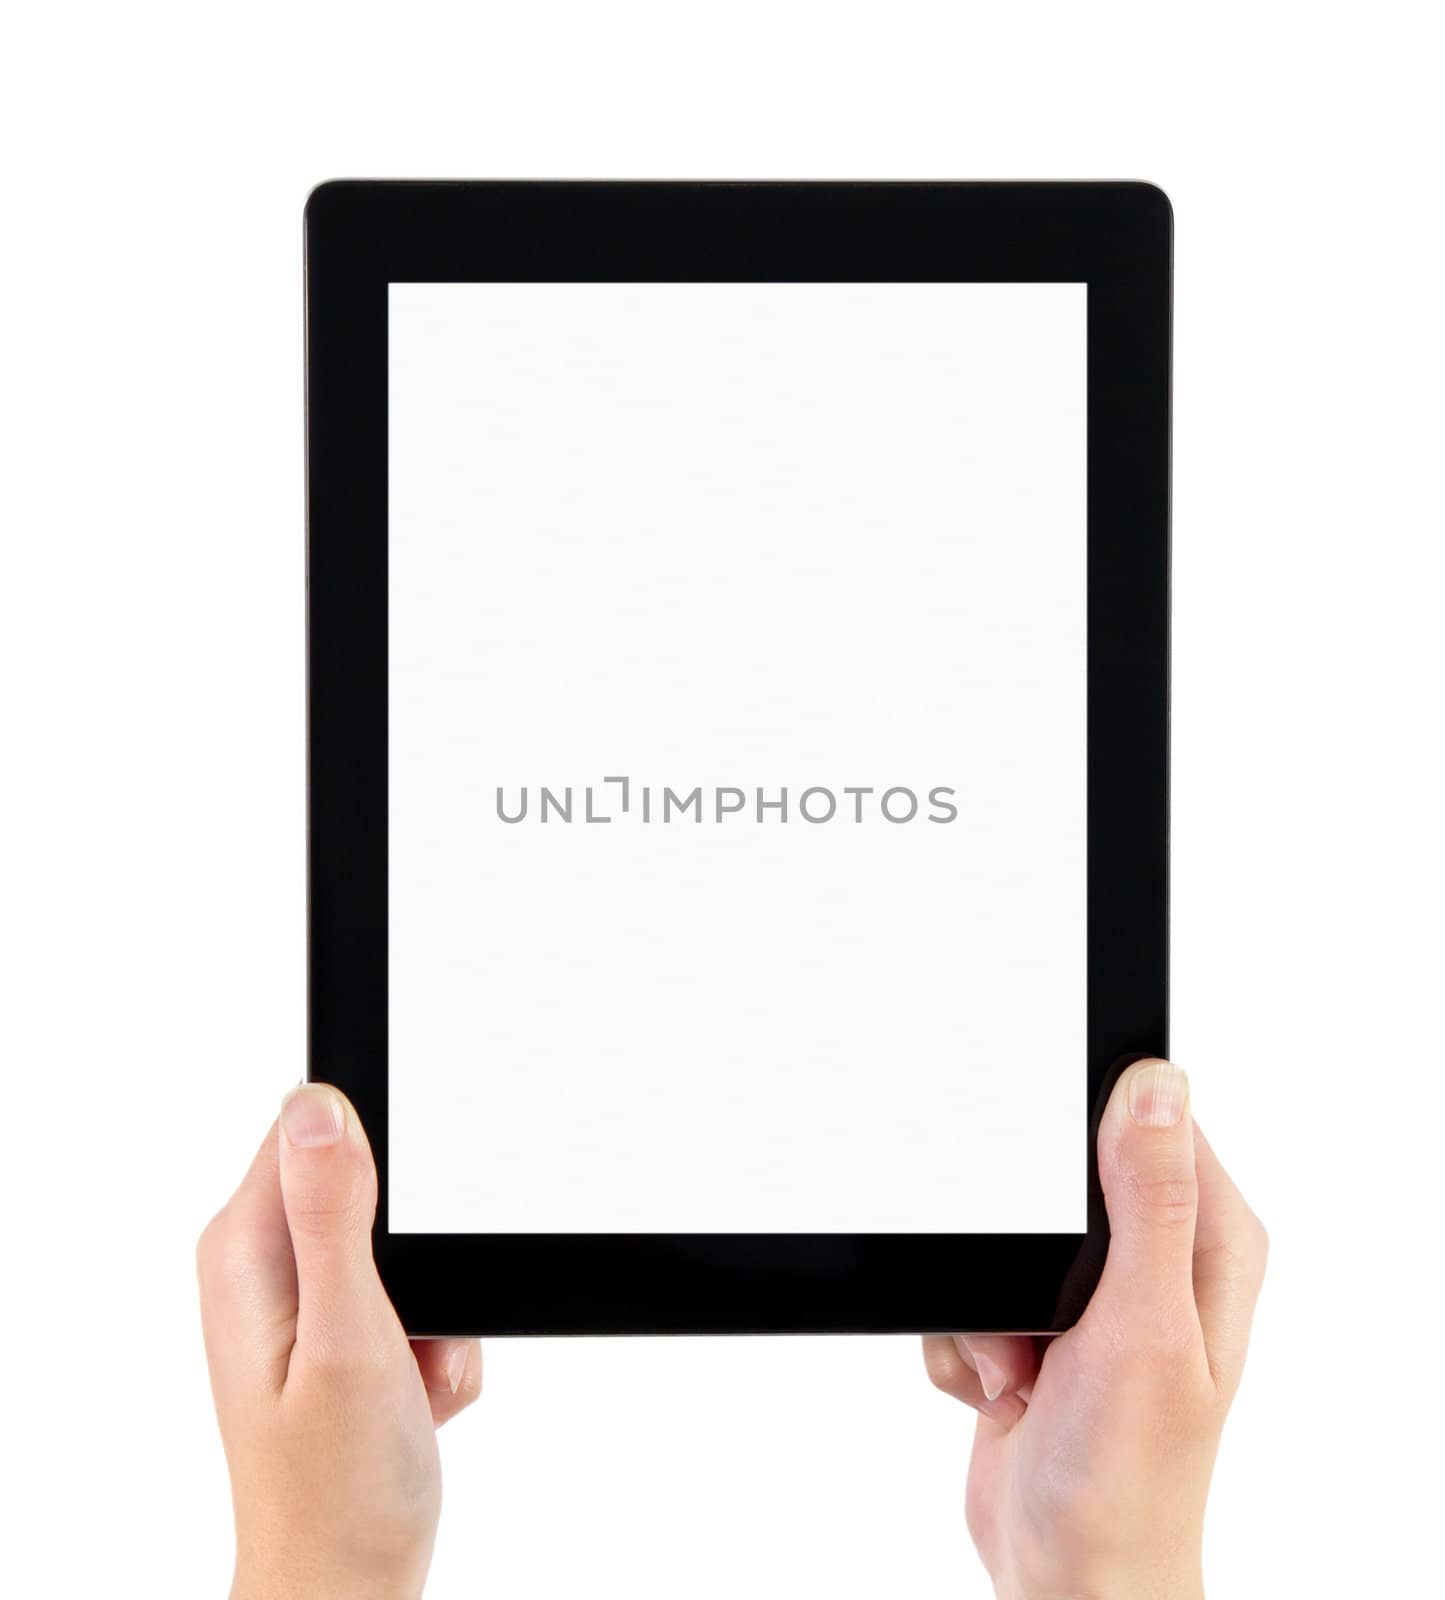 Woman hands holding electronic tablet pc with blank screen. Isolated on white.